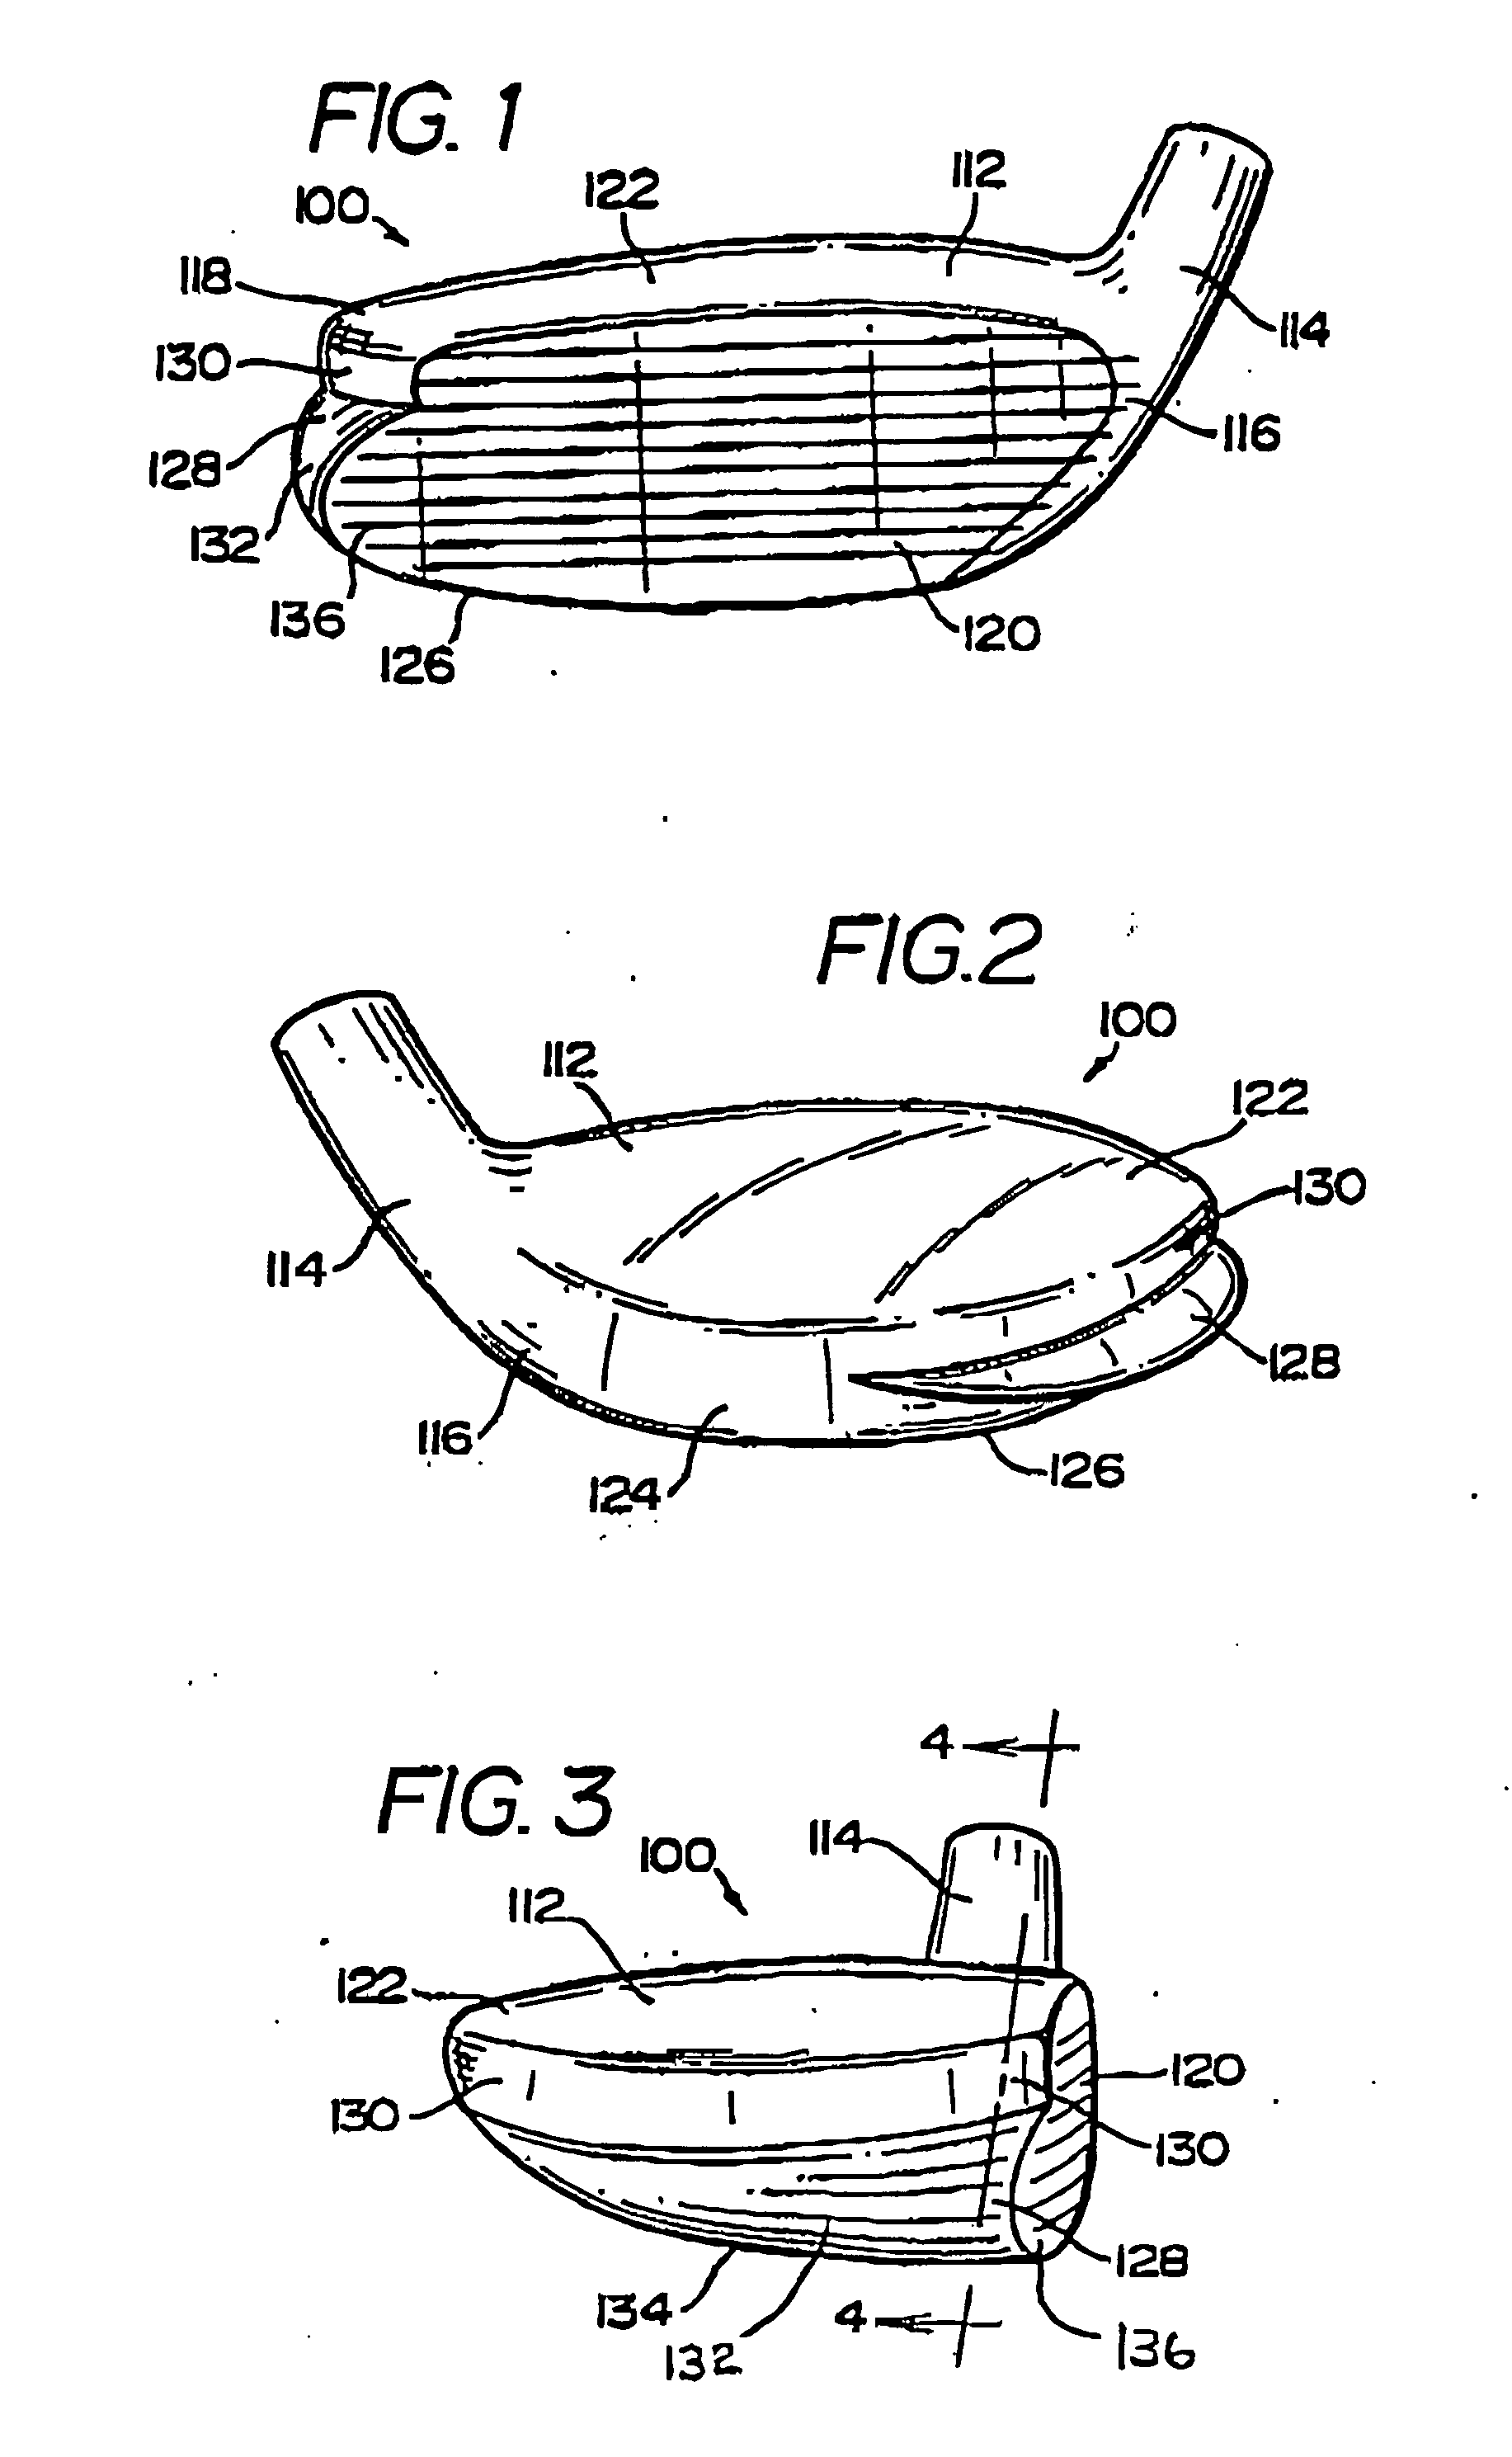 Metalwood type golf clubhead having an improved structural system for reduction of the cubic centimeter displacement and the elimination of adverse aerodynamic drag effect